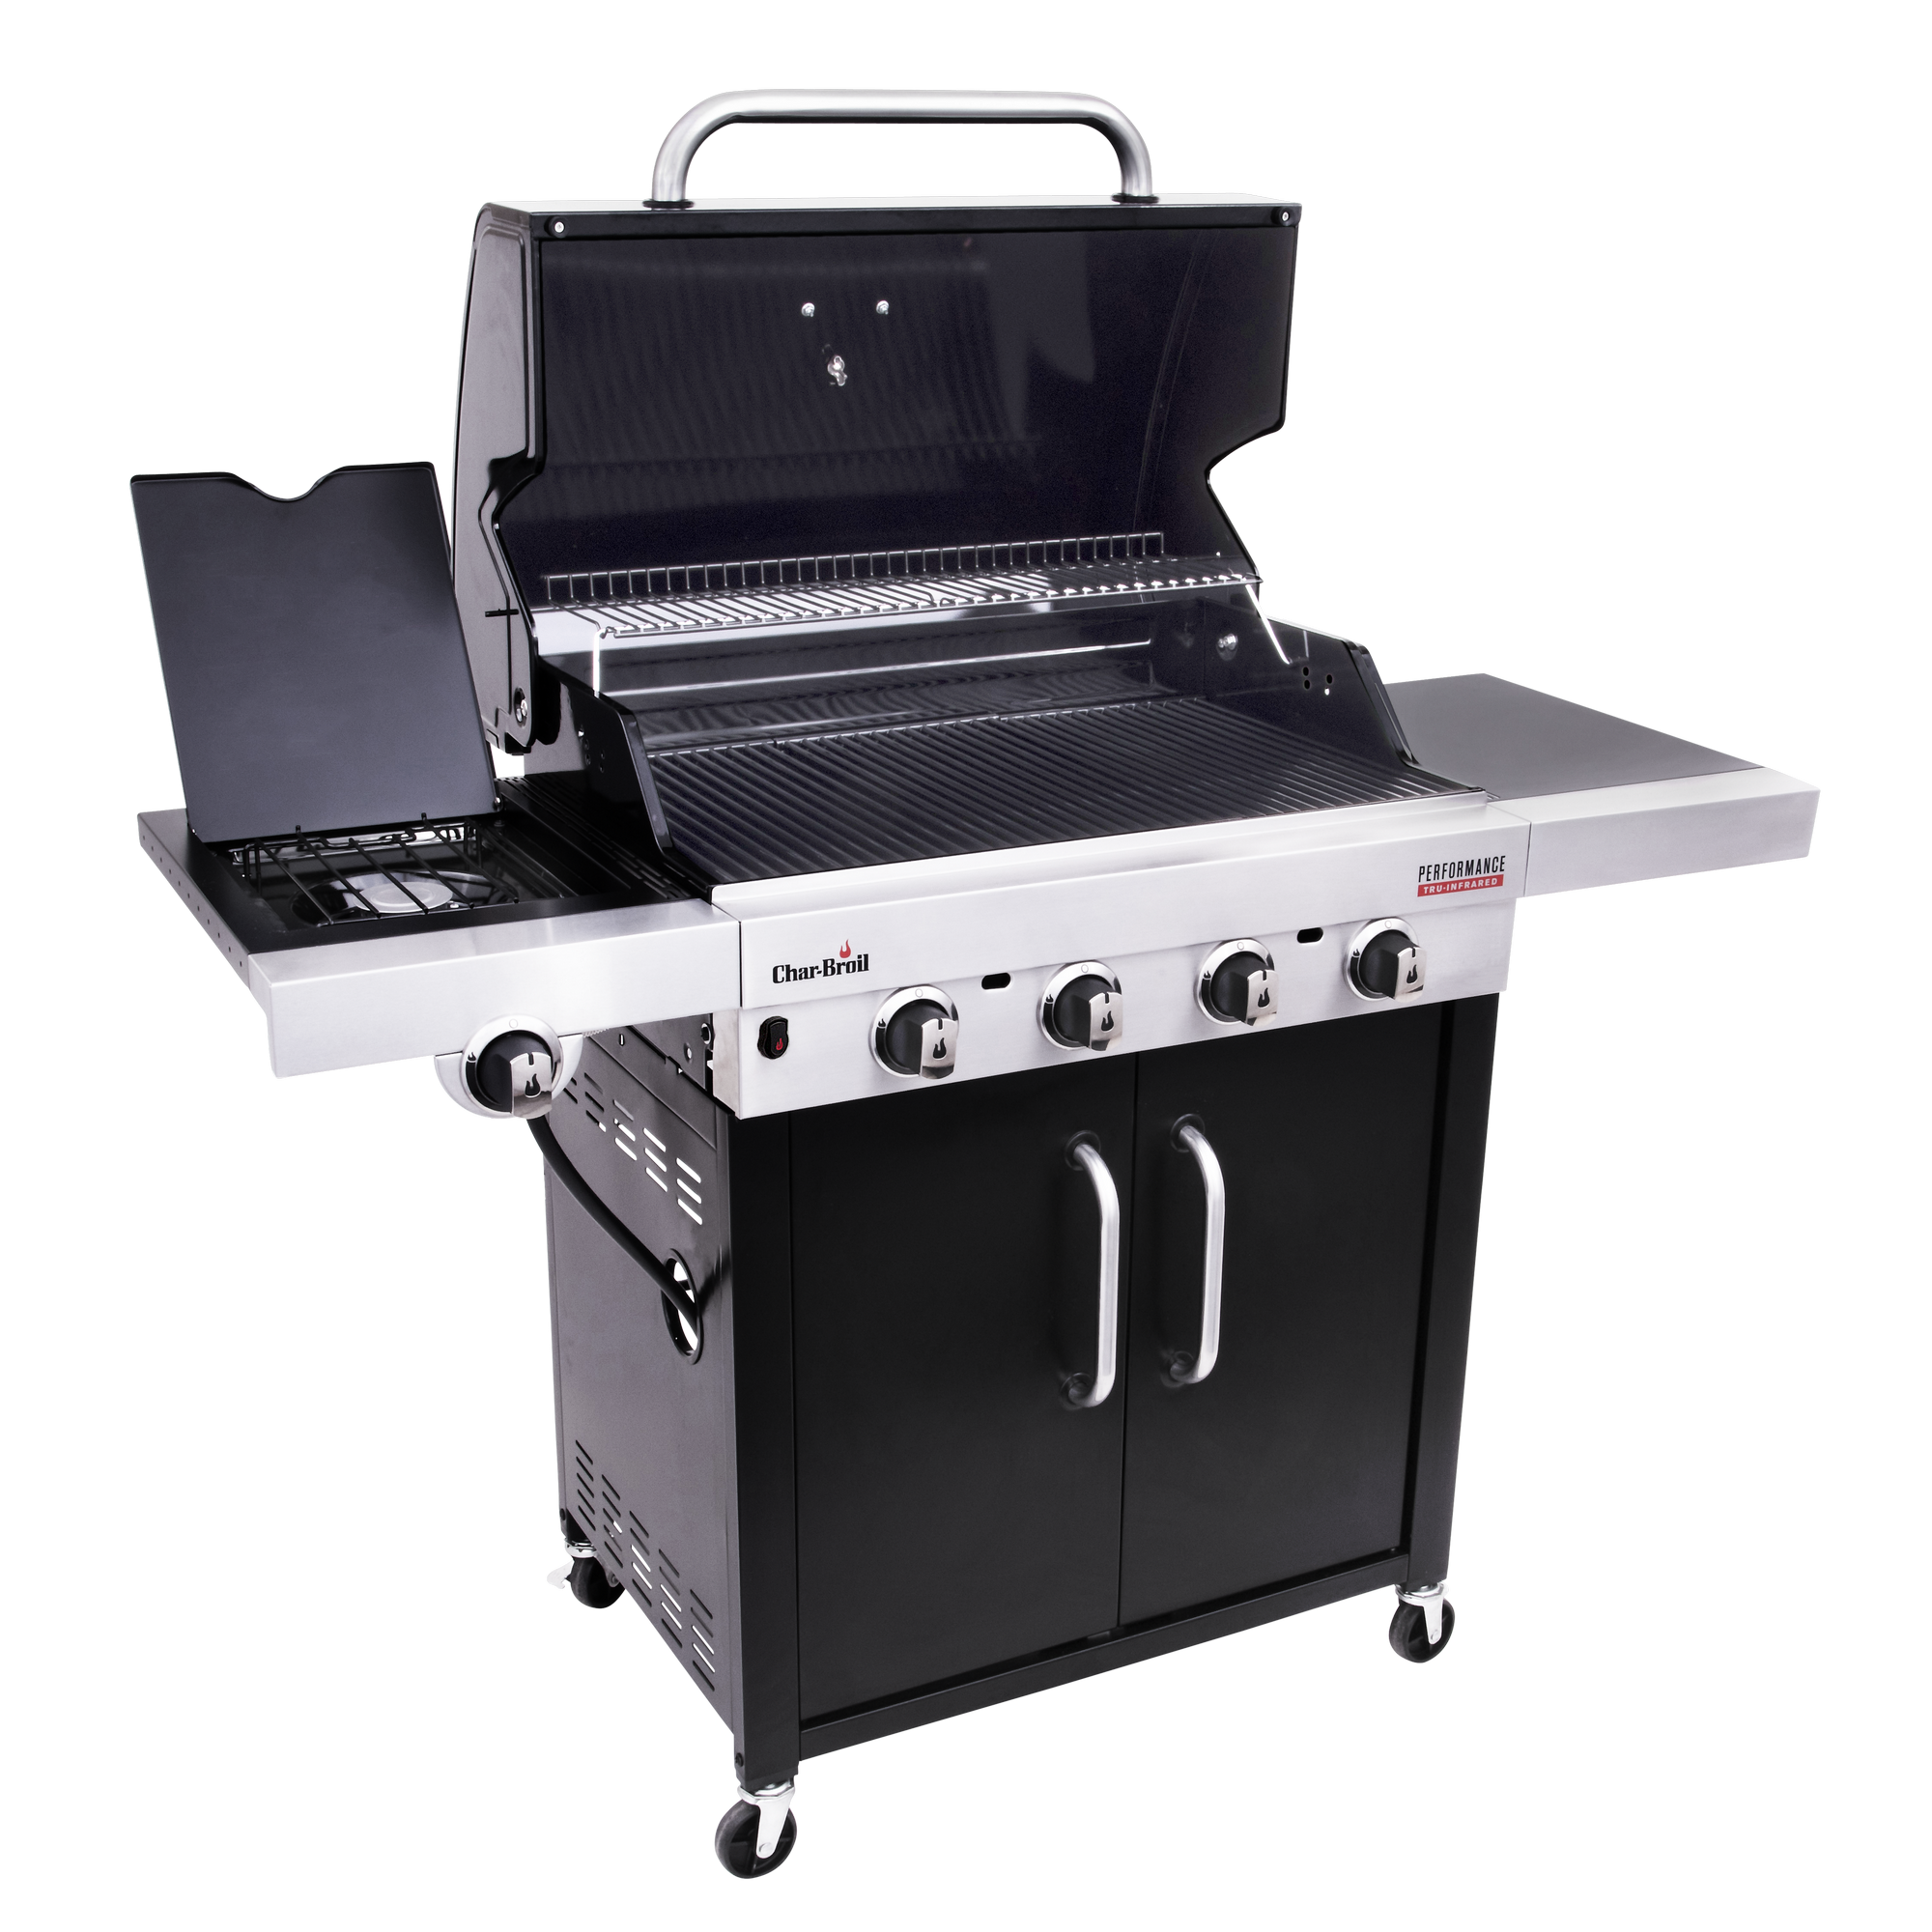 Gasgrill 'Performance 440 B' schwarz 10,5 kW + product picture